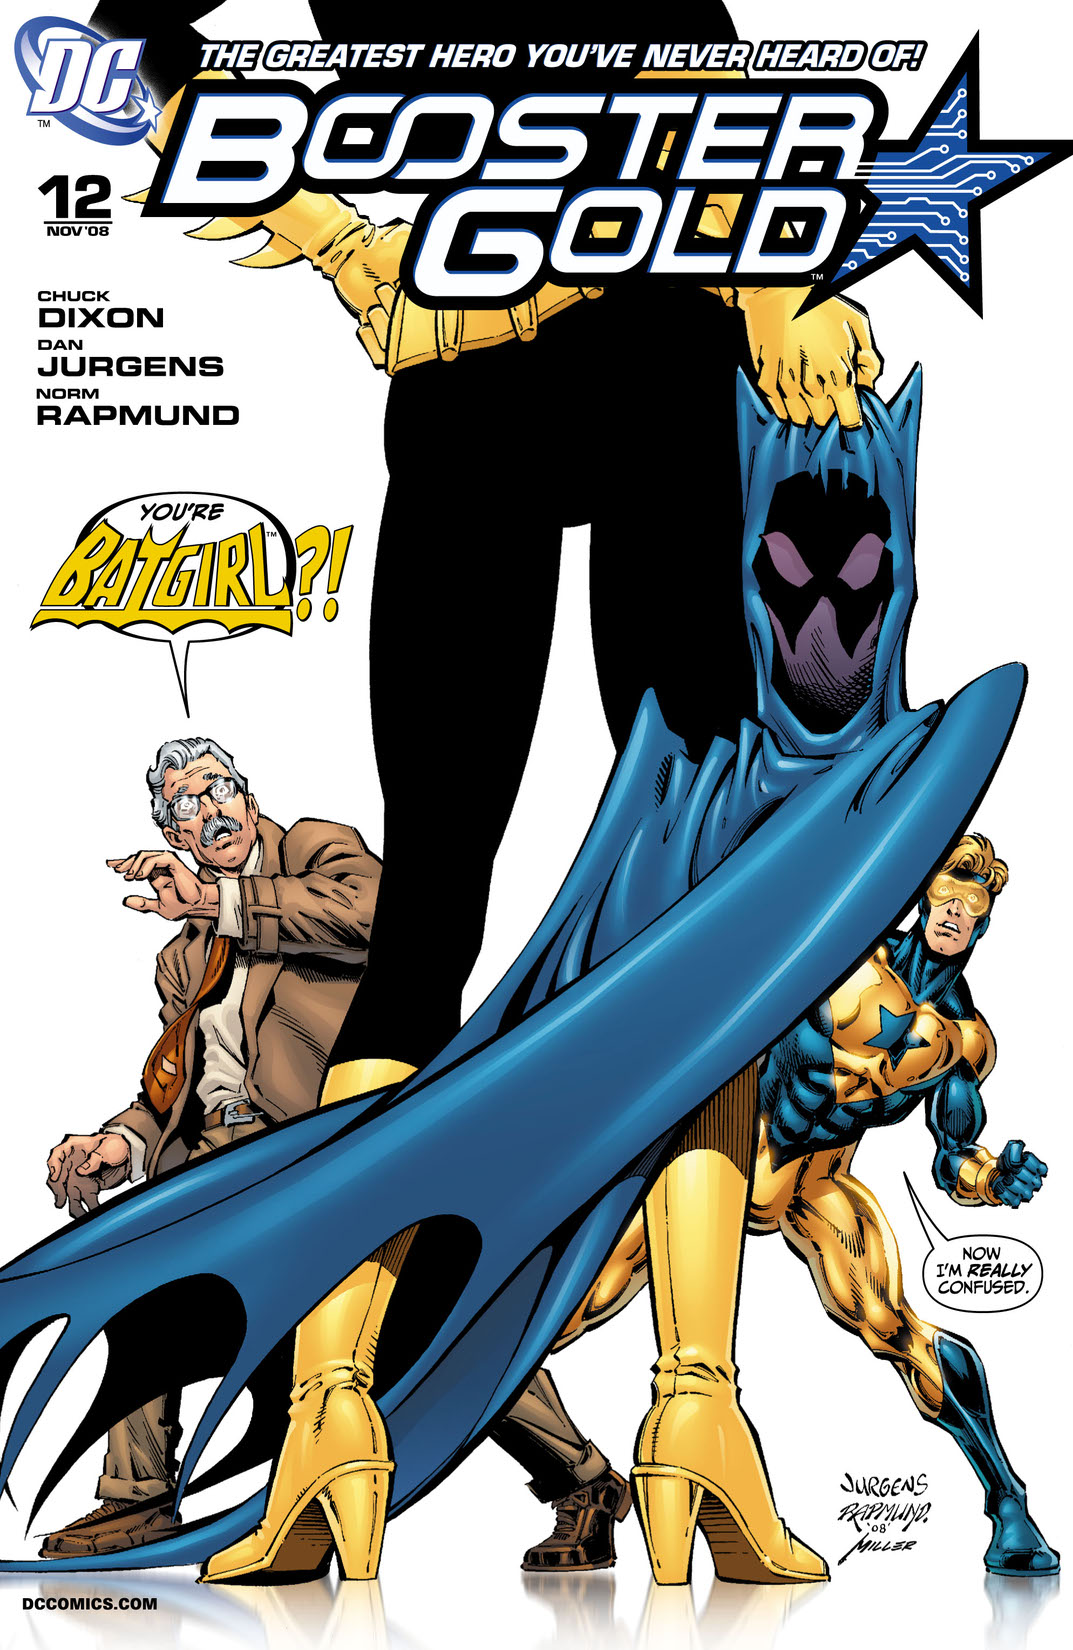 Booster Gold (2007-) #12 preview images